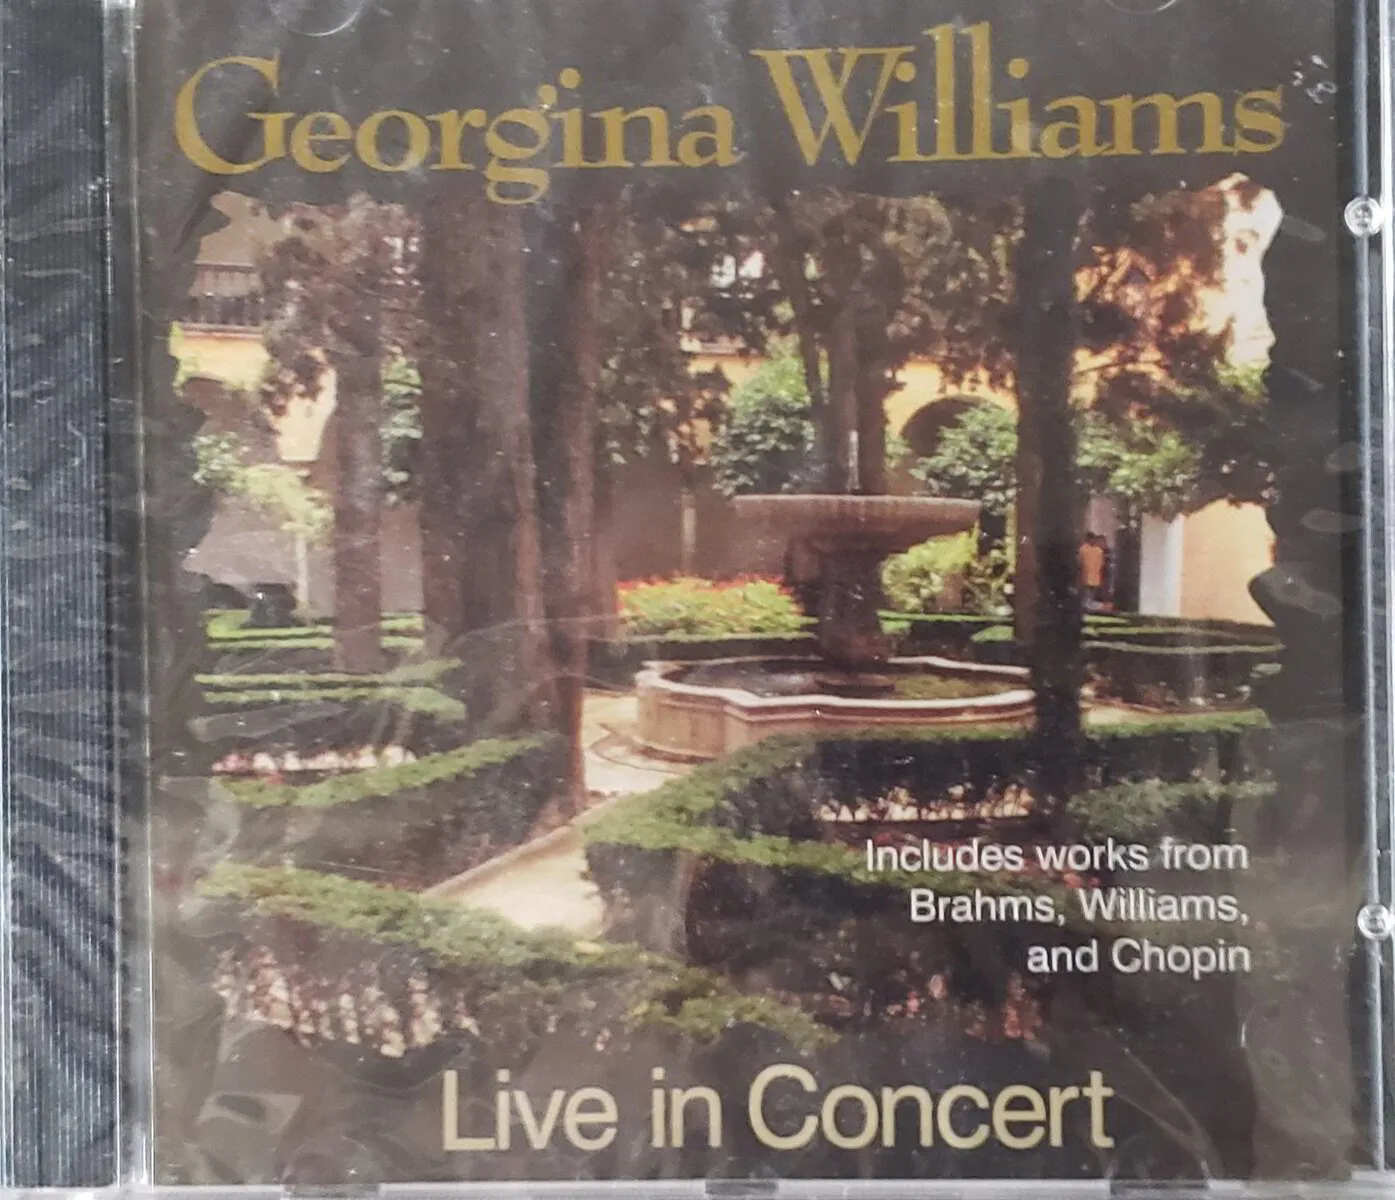 Georgina Williams Live In Concert - Physical Album - Limited Edition